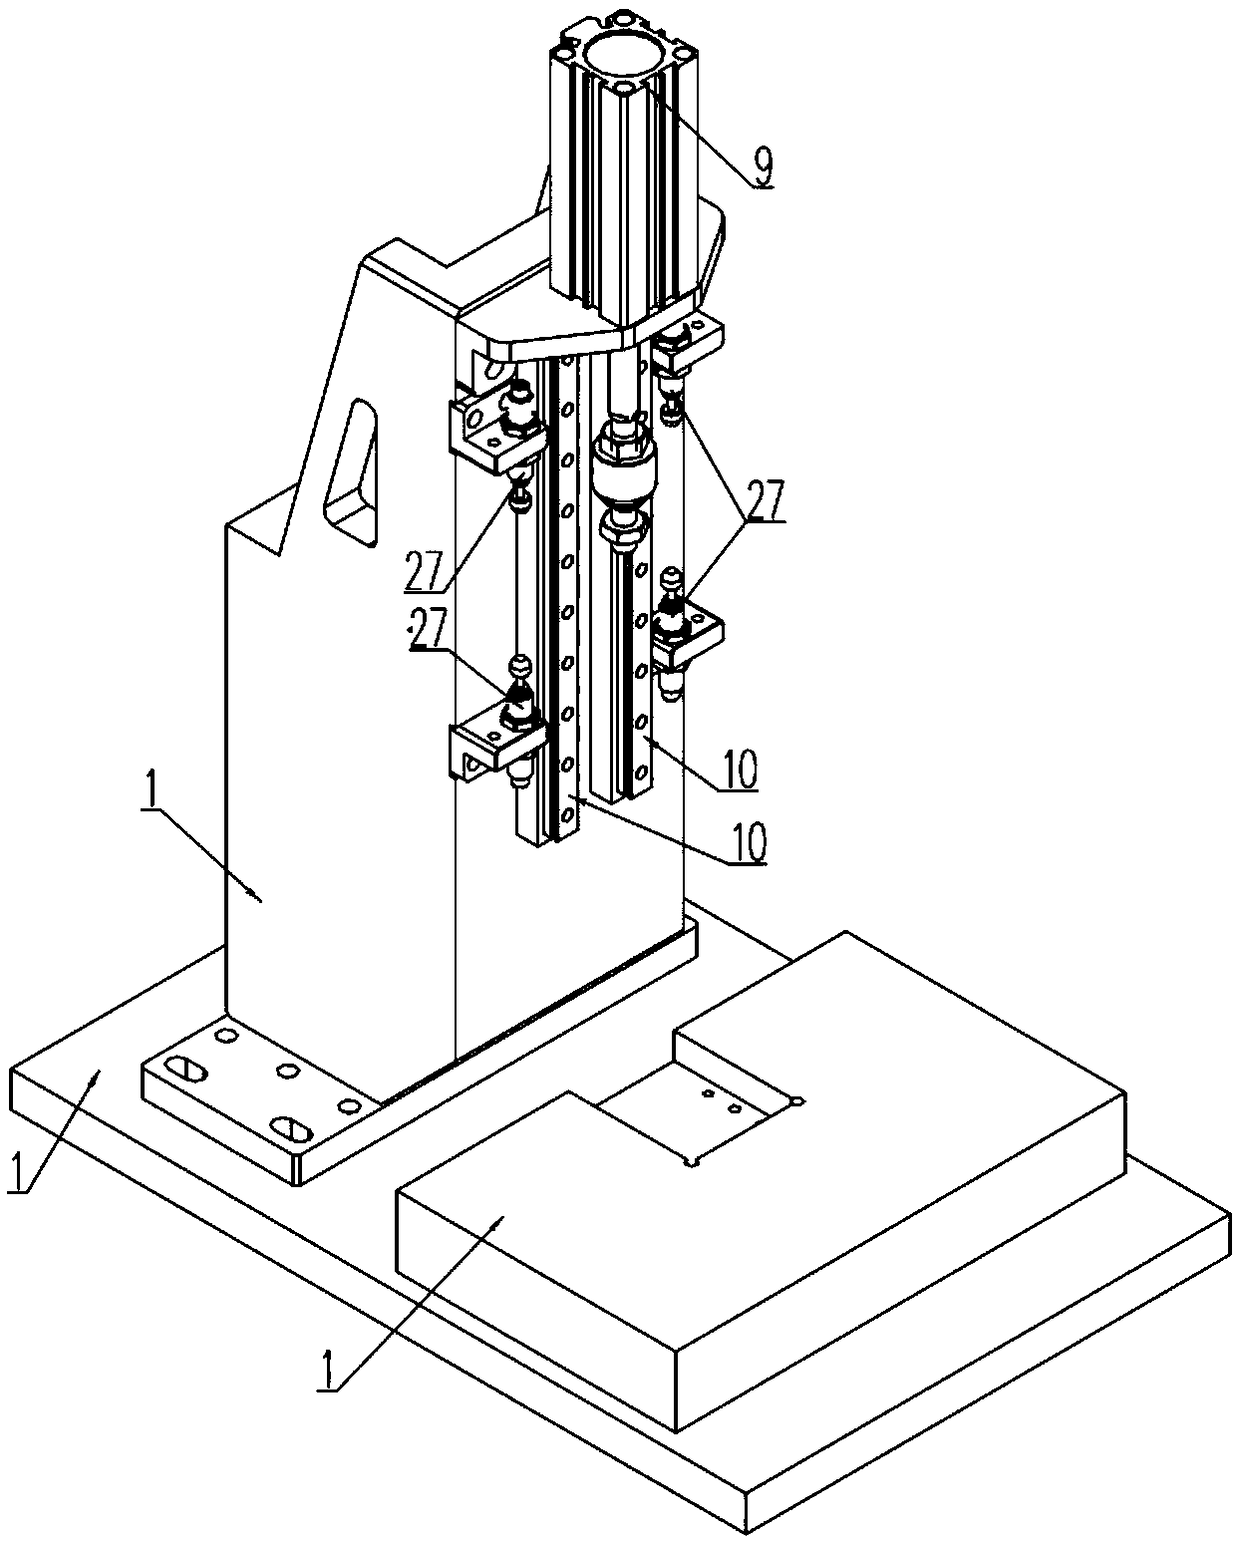 Mechanism used for maintaining pressure of L-shaped part